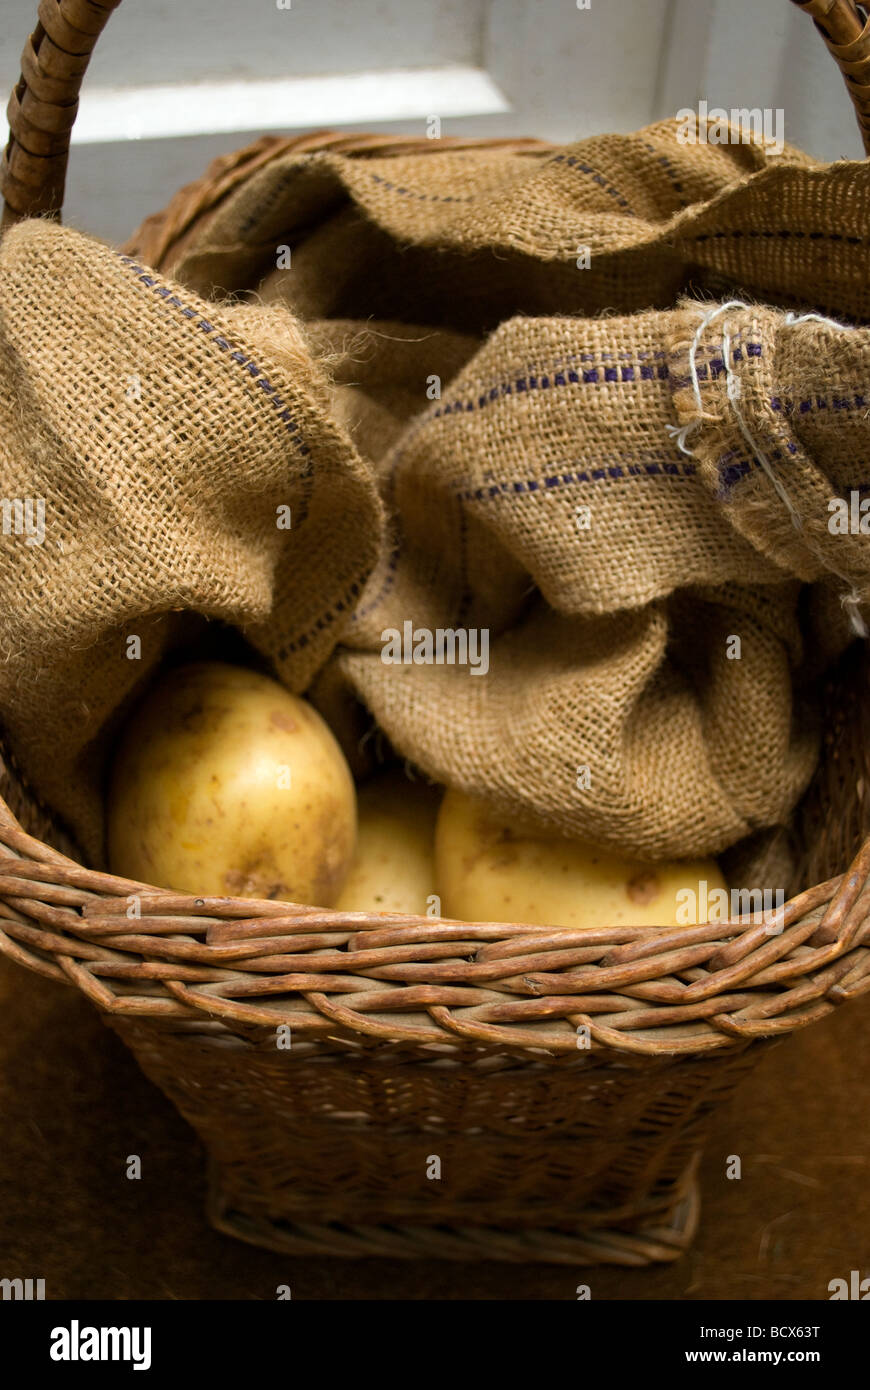 Potatoes being kept in hessian in a basket. Stock Photo